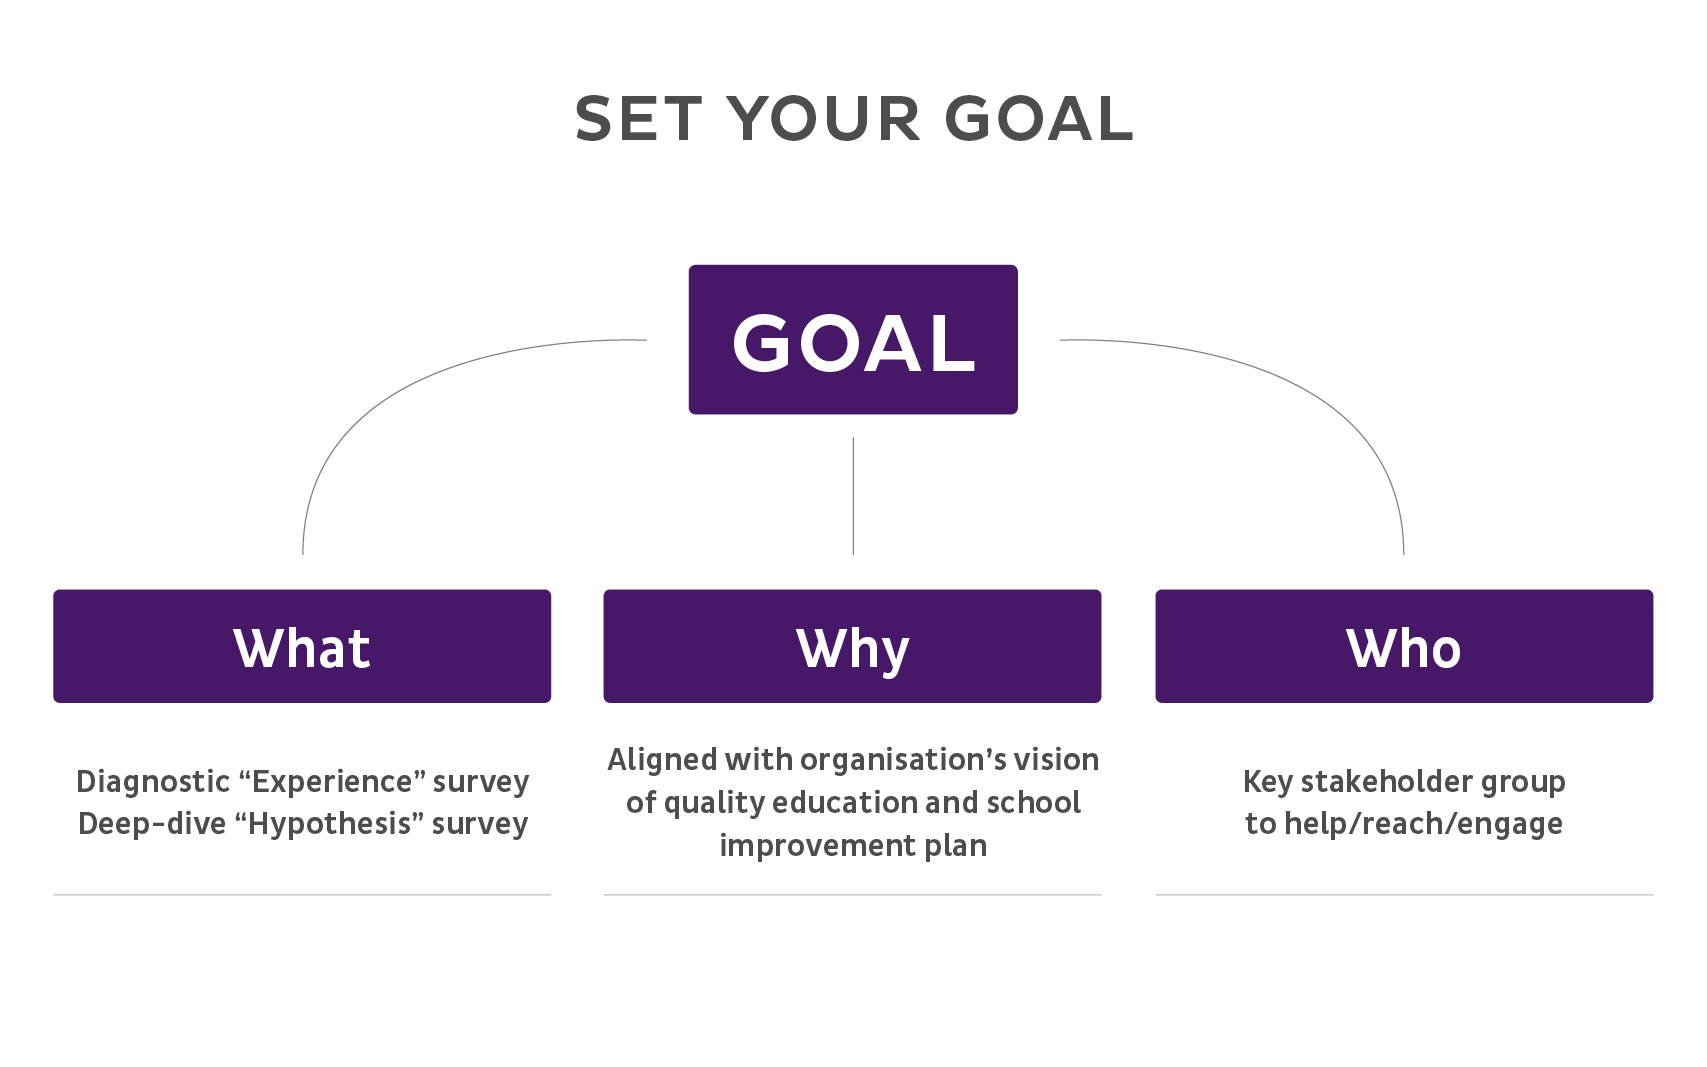 Set your goal - WHAT, WHY, WHO